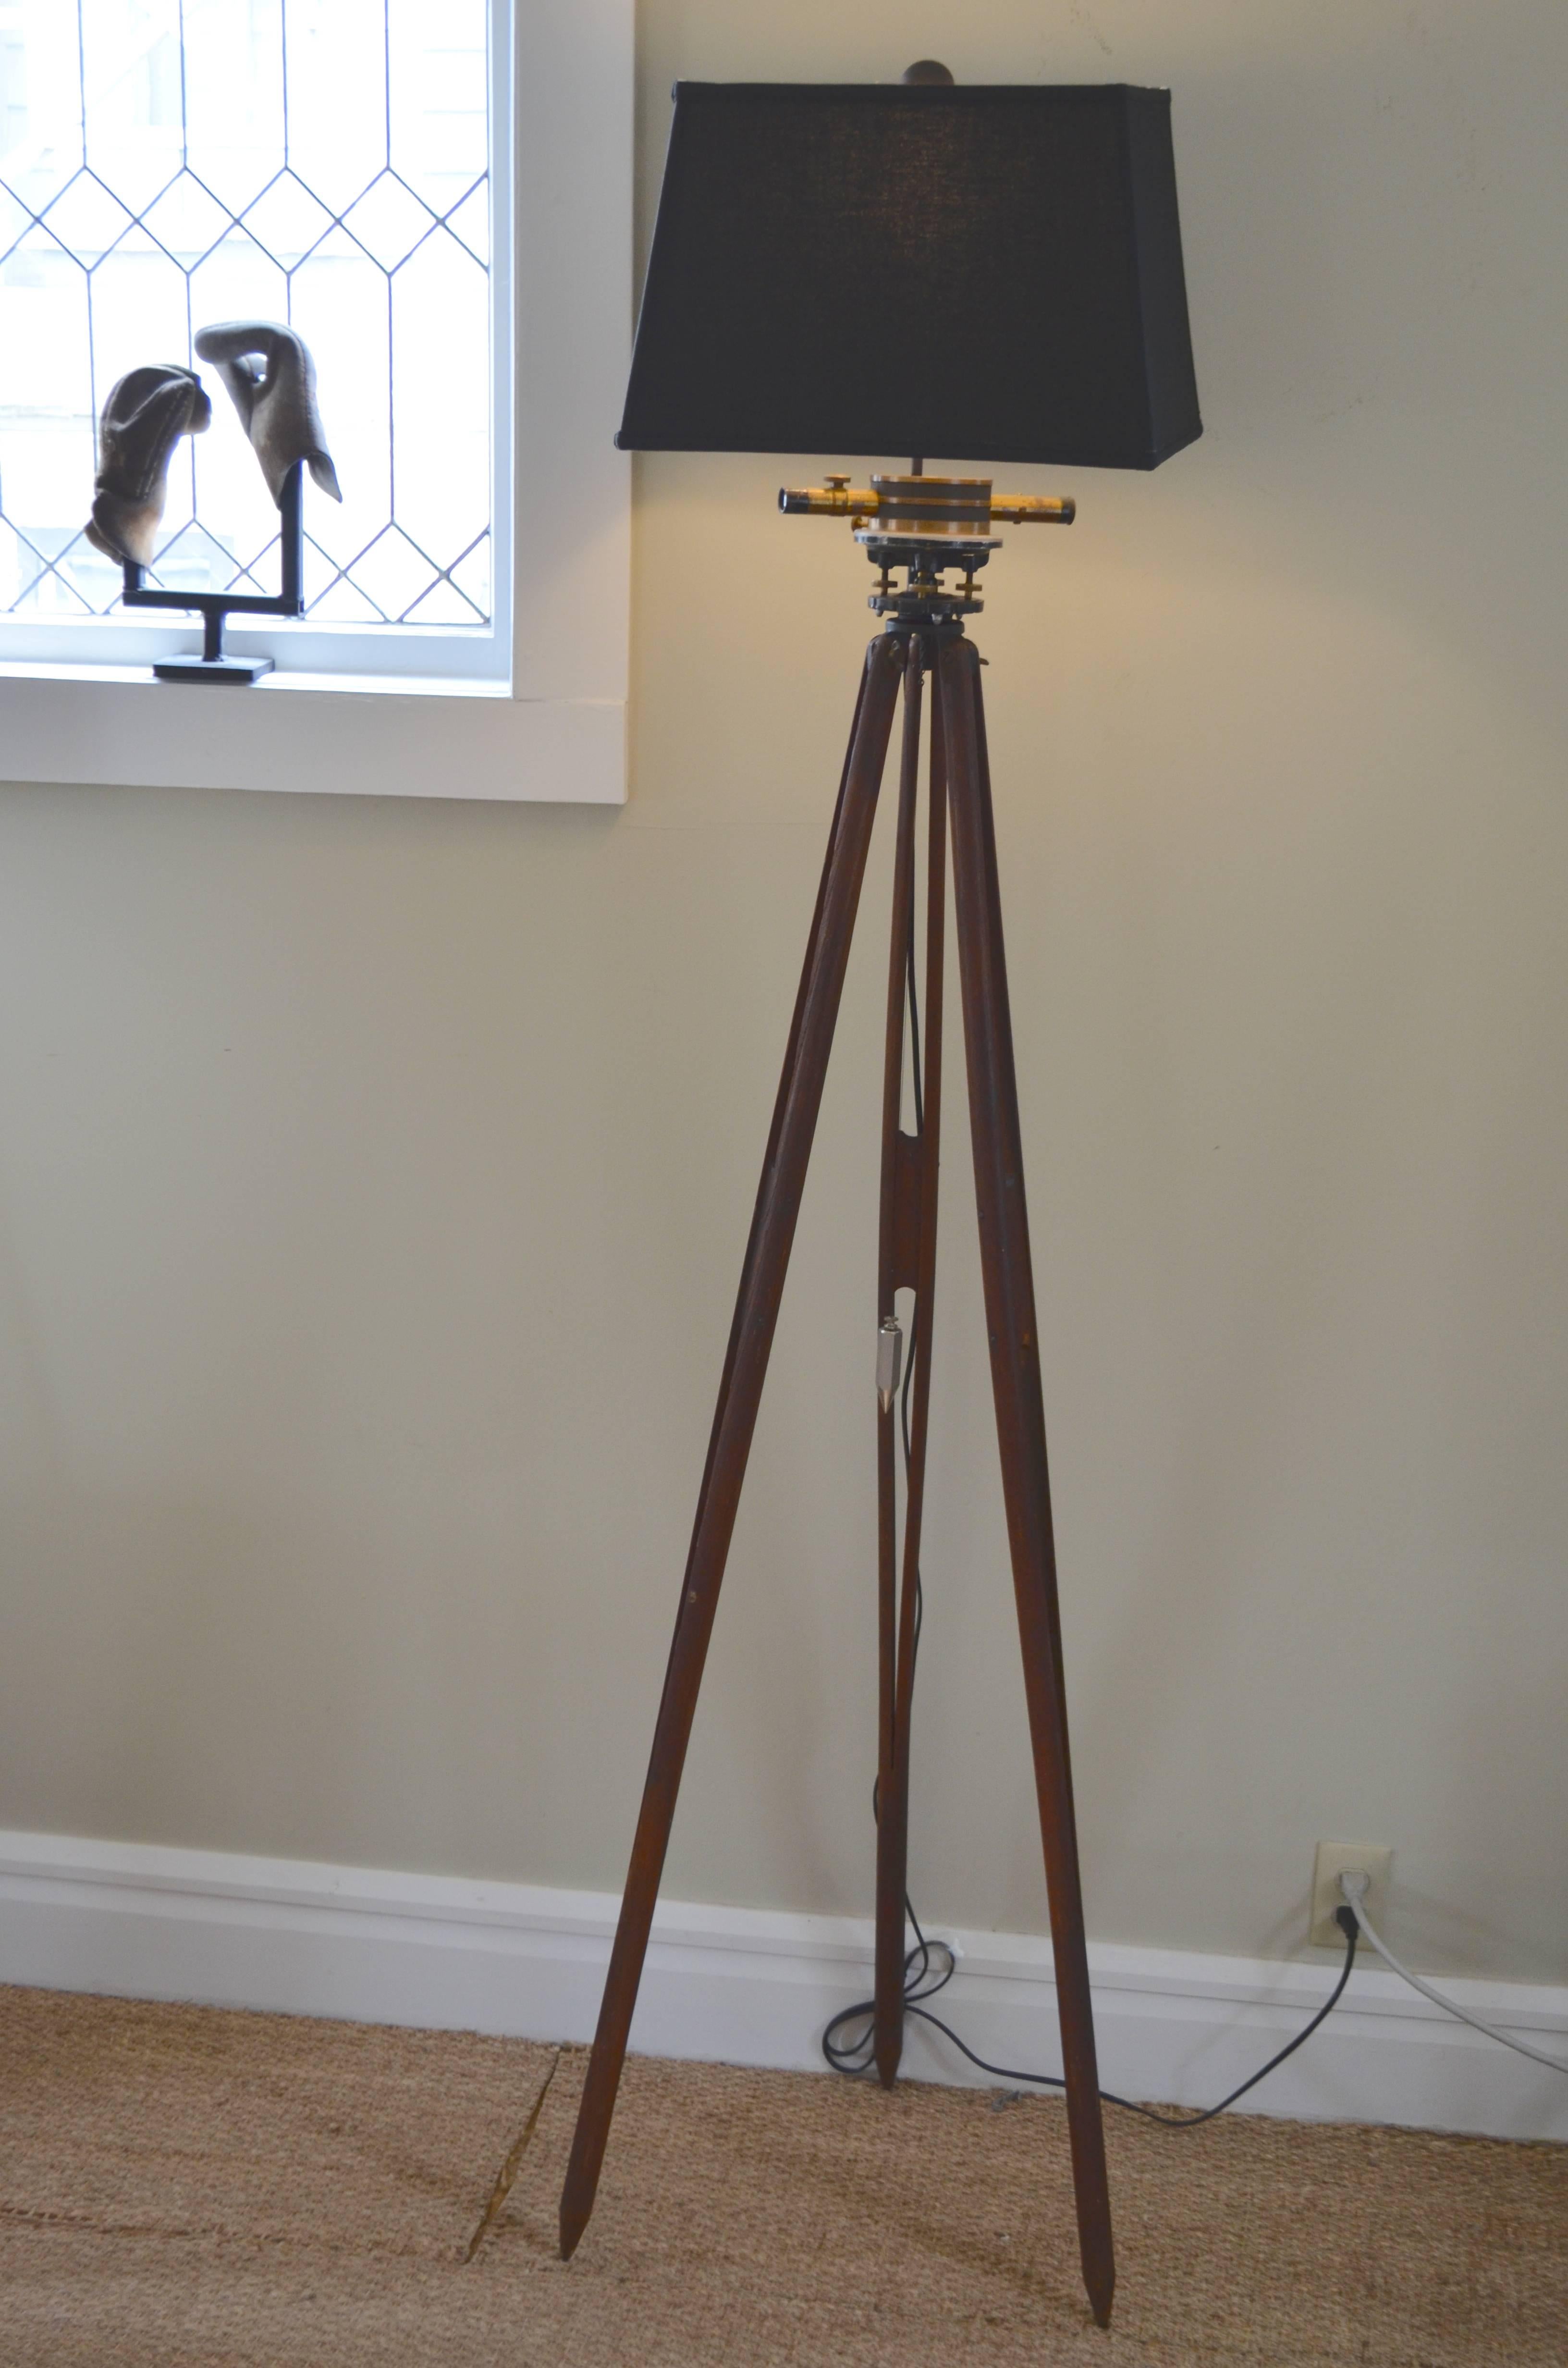 American Floor Lamp Fashioned from Surveyor's Tripod with Telescoping Brass Hardware